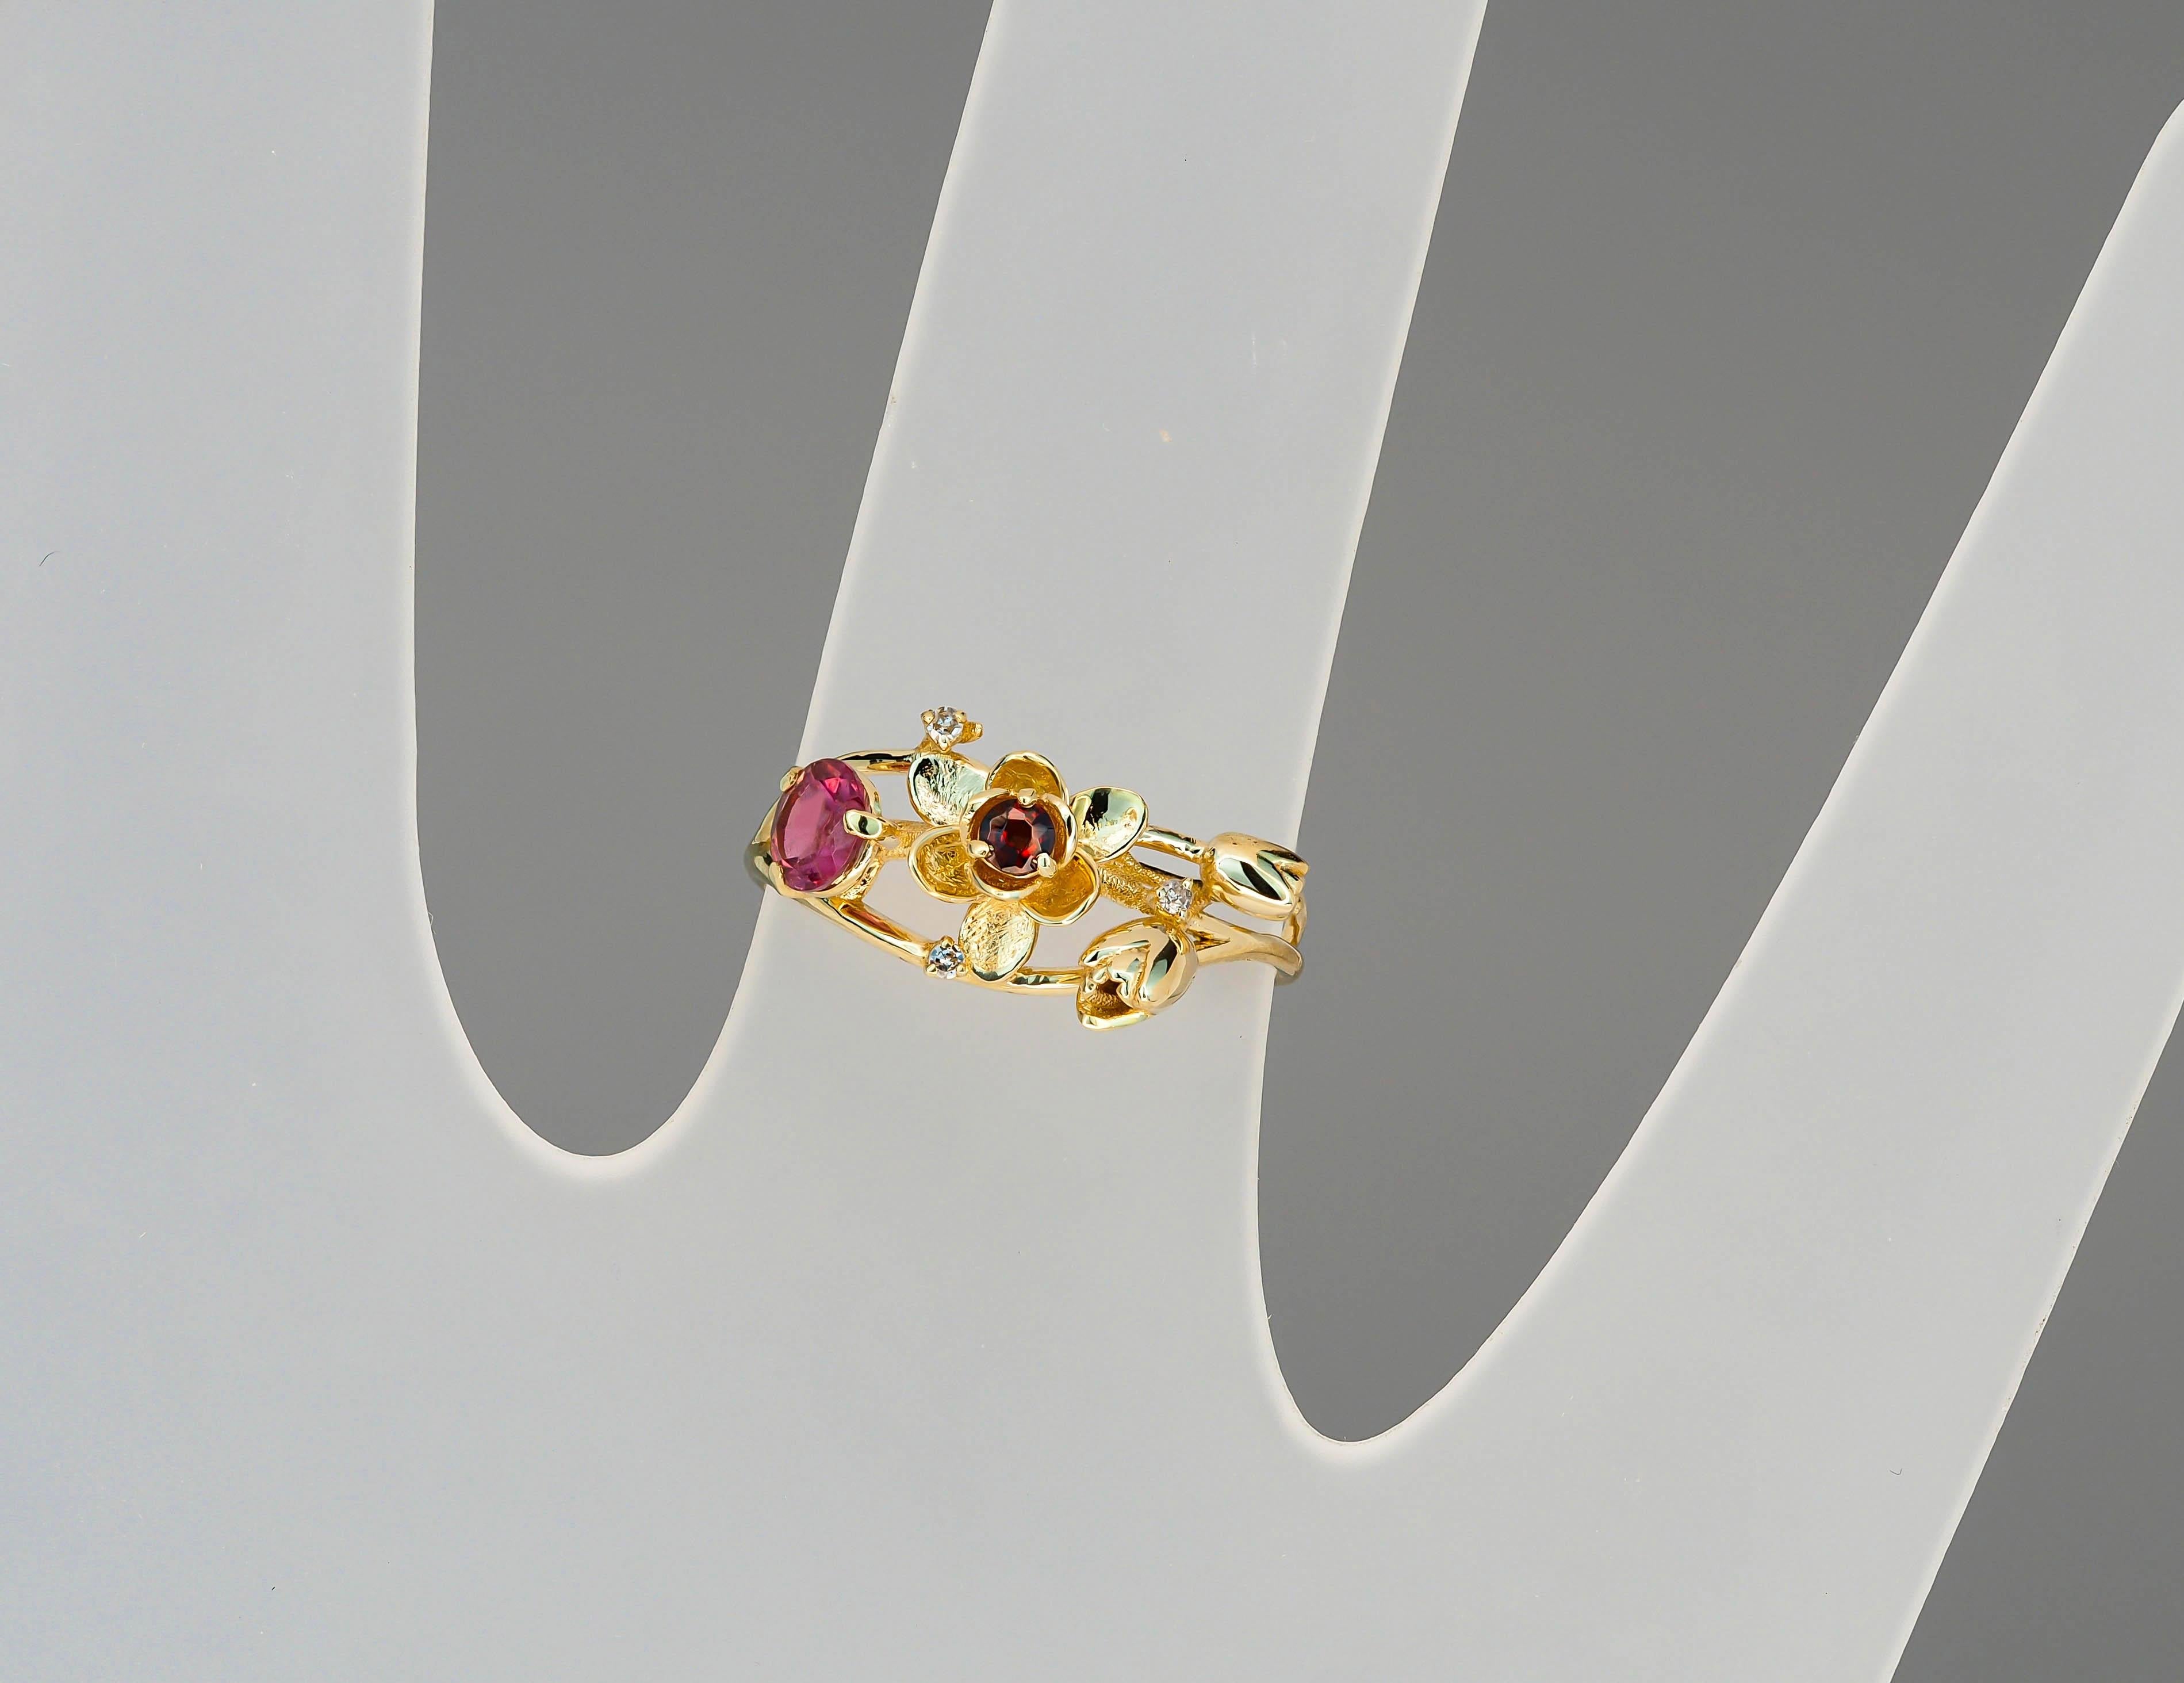 For Sale:  Ruby ring. 14k Gold Ring with Ruby, Garnet and Diamonds. Orchid Flower Ring. 8